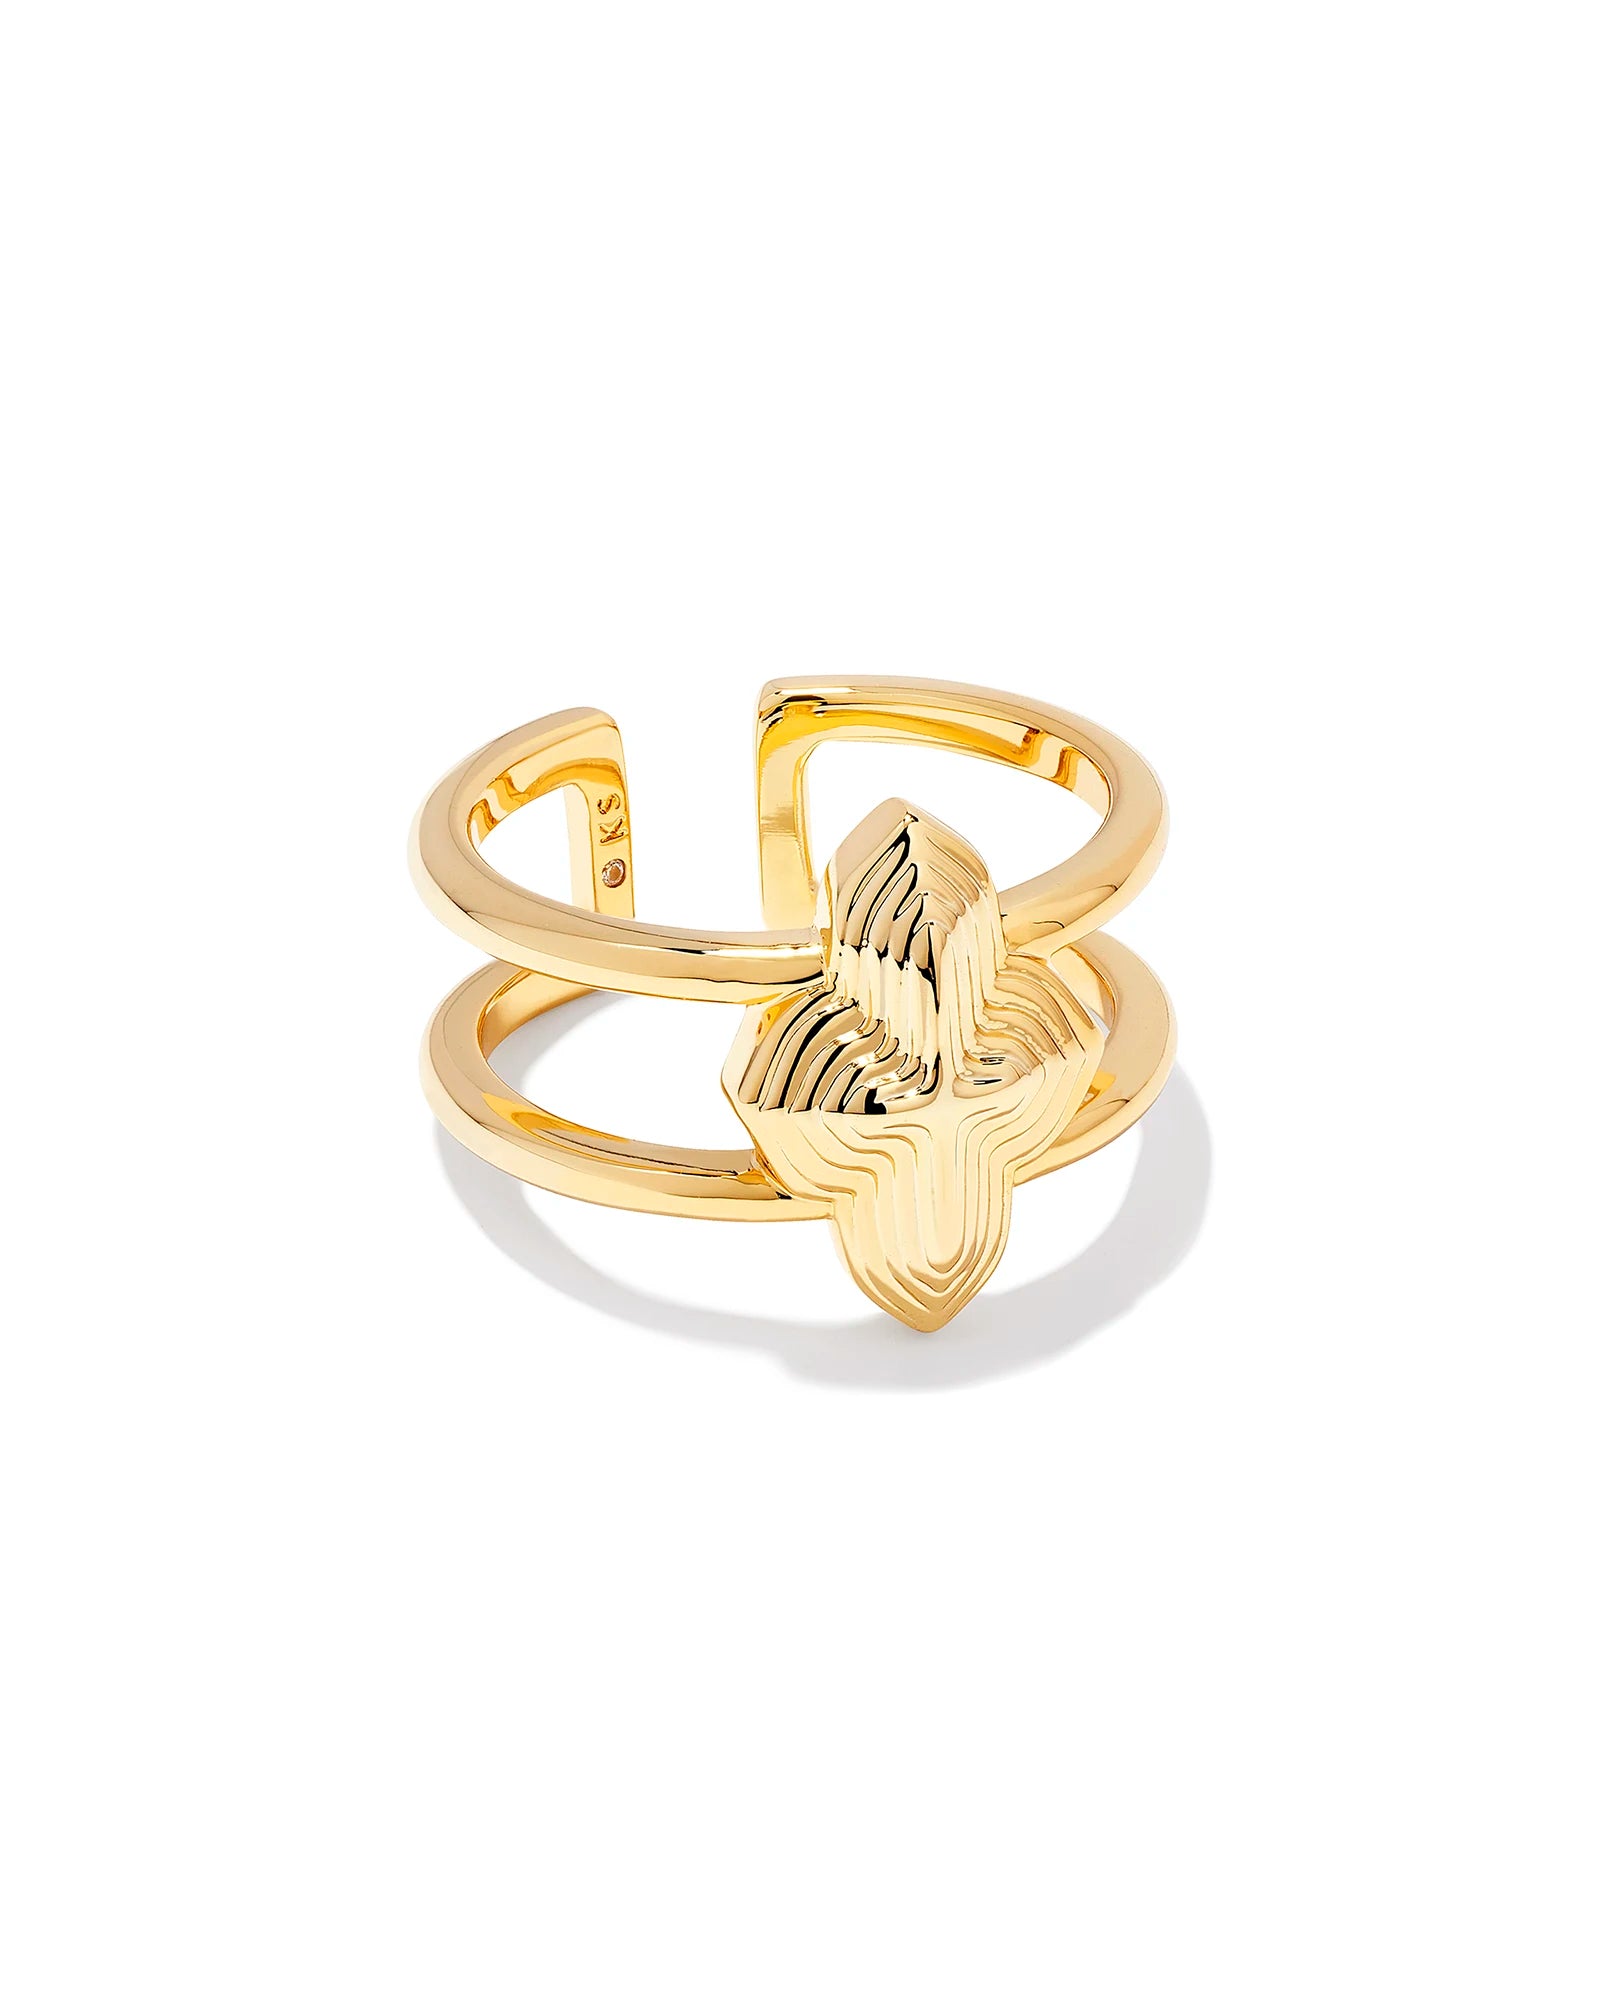 KENDRA SCOTT- Abbie Double Band Ring in Gold Metal